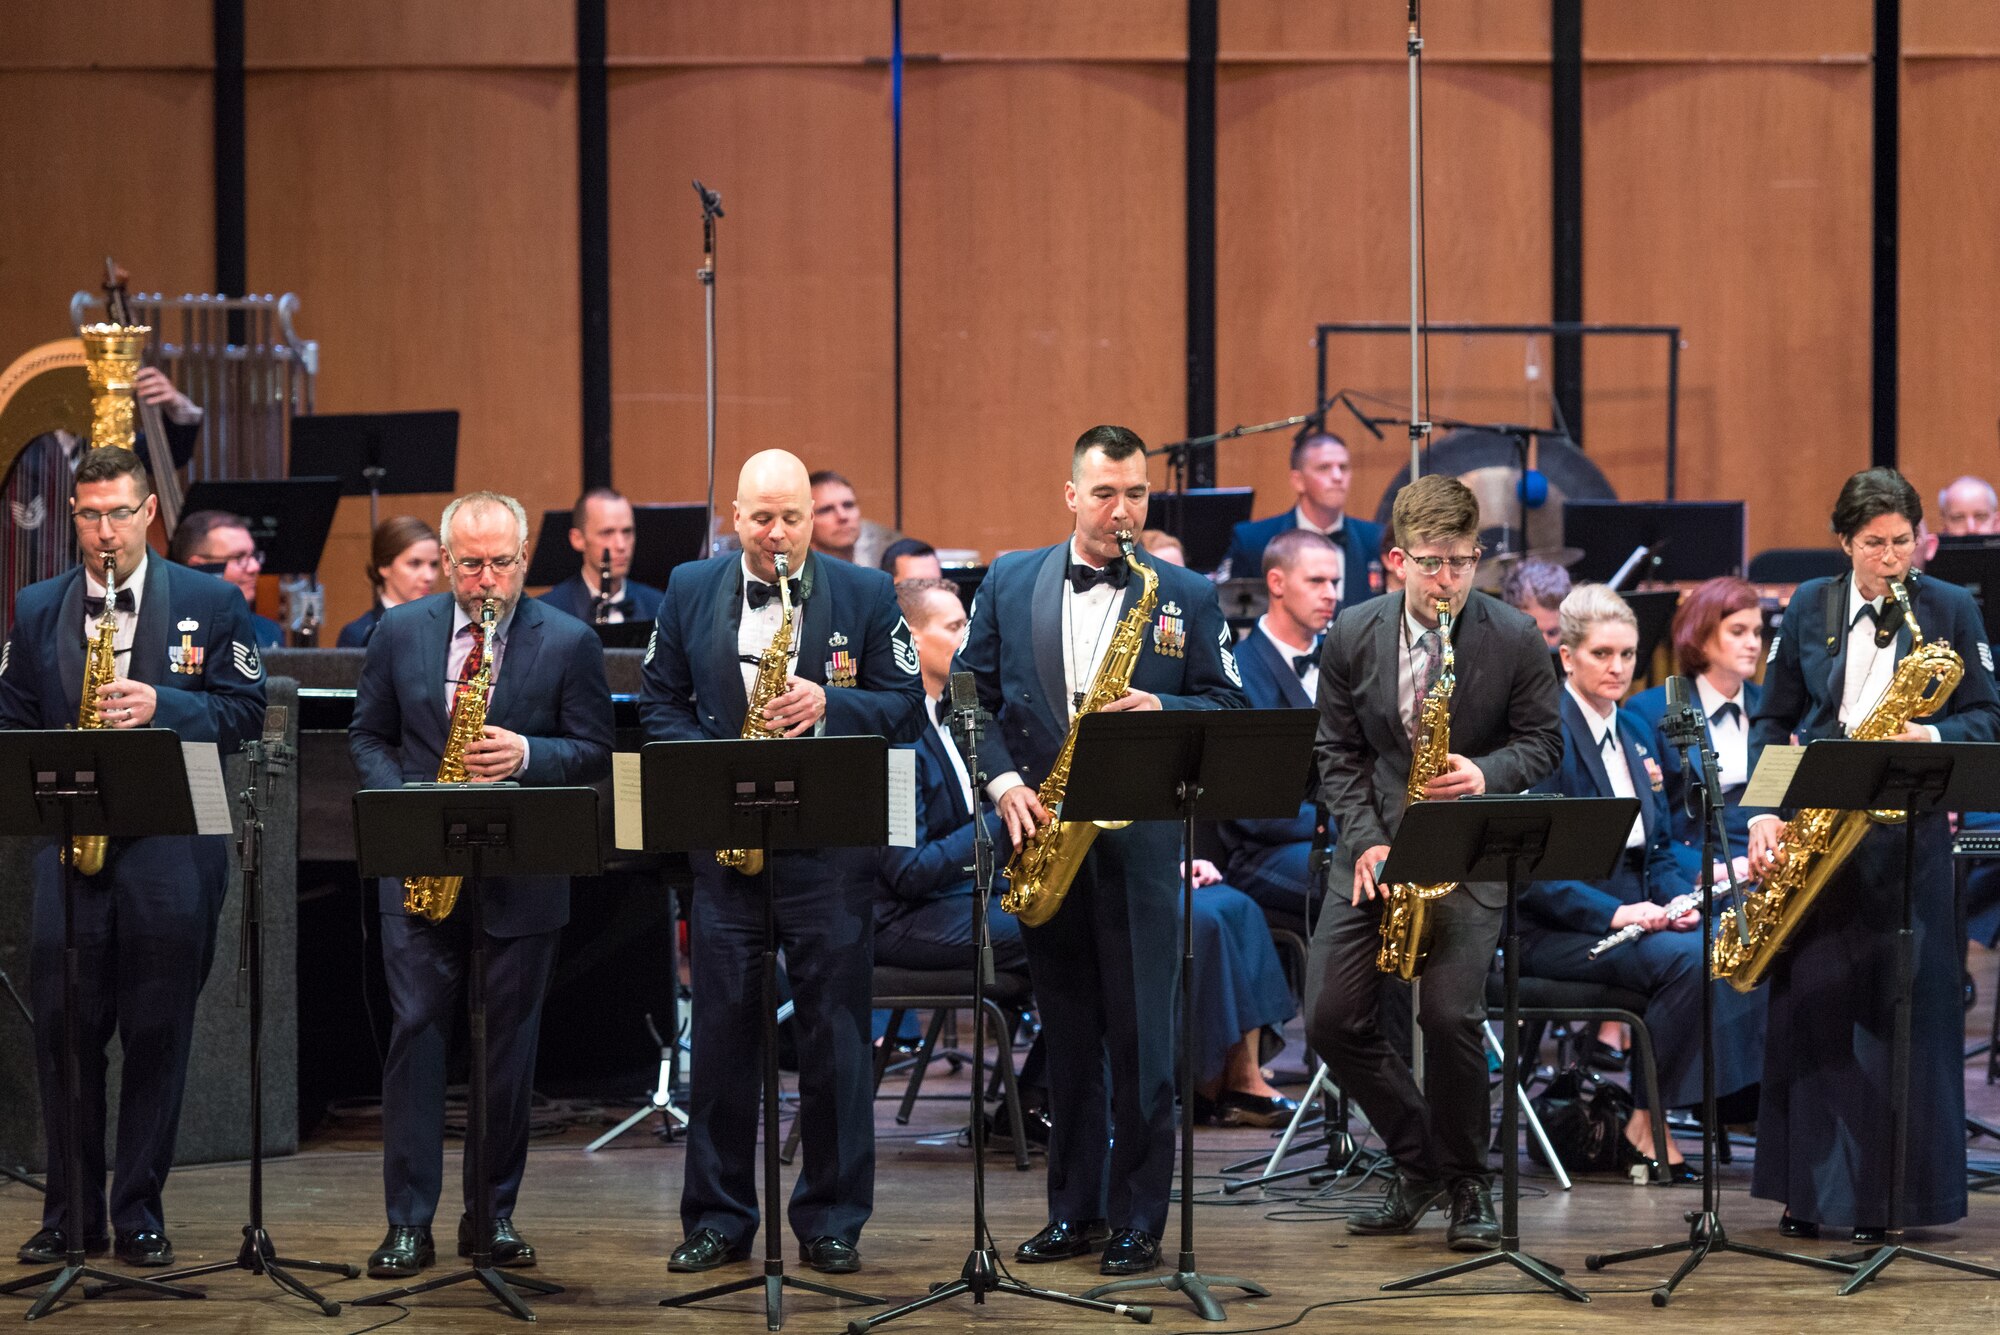 Internationally acclaimed saxophonist Joe Lulloff joins the saxophone section of the U.S. Air Force Concert Band on Thursday, Apr. 18, at the Rachel M. Schlesinger Concert Hall and Arts Center in Alexandria, Virginia. This concert was the final installment of The U.S. Air Force Band's 2019 Guest Artist Series. (U.S. Air Force photo by Master Sgt. Grant Langford)